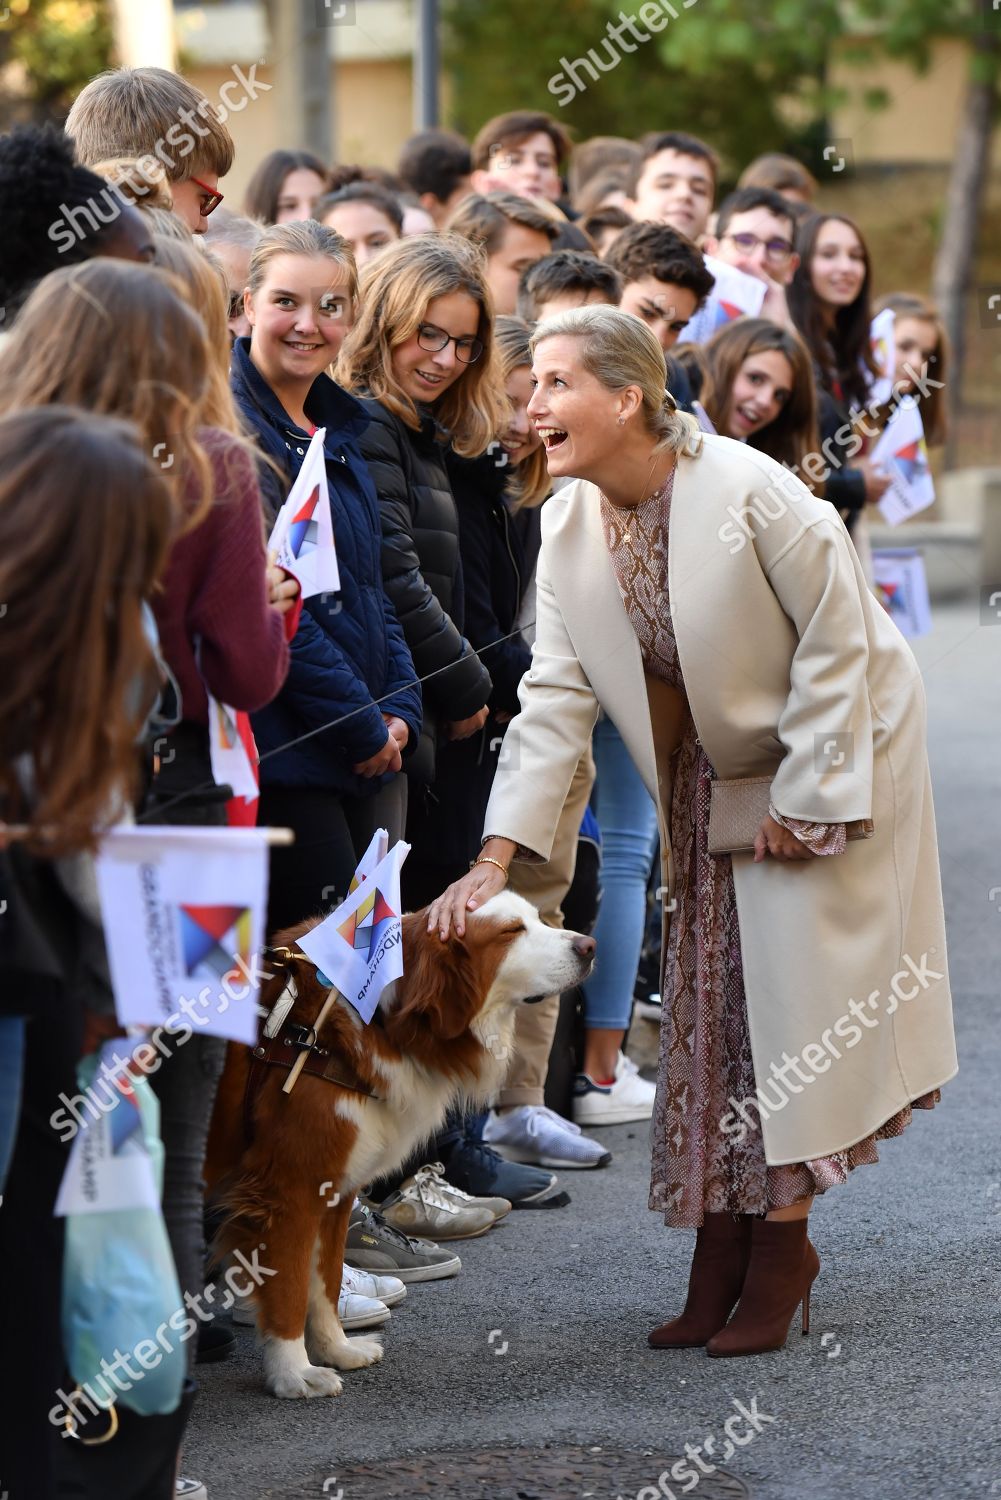 prince-edward-and-sophie-countess-of-wessex-visit-to-france-shutterstock-editorial-9907868an.jpg